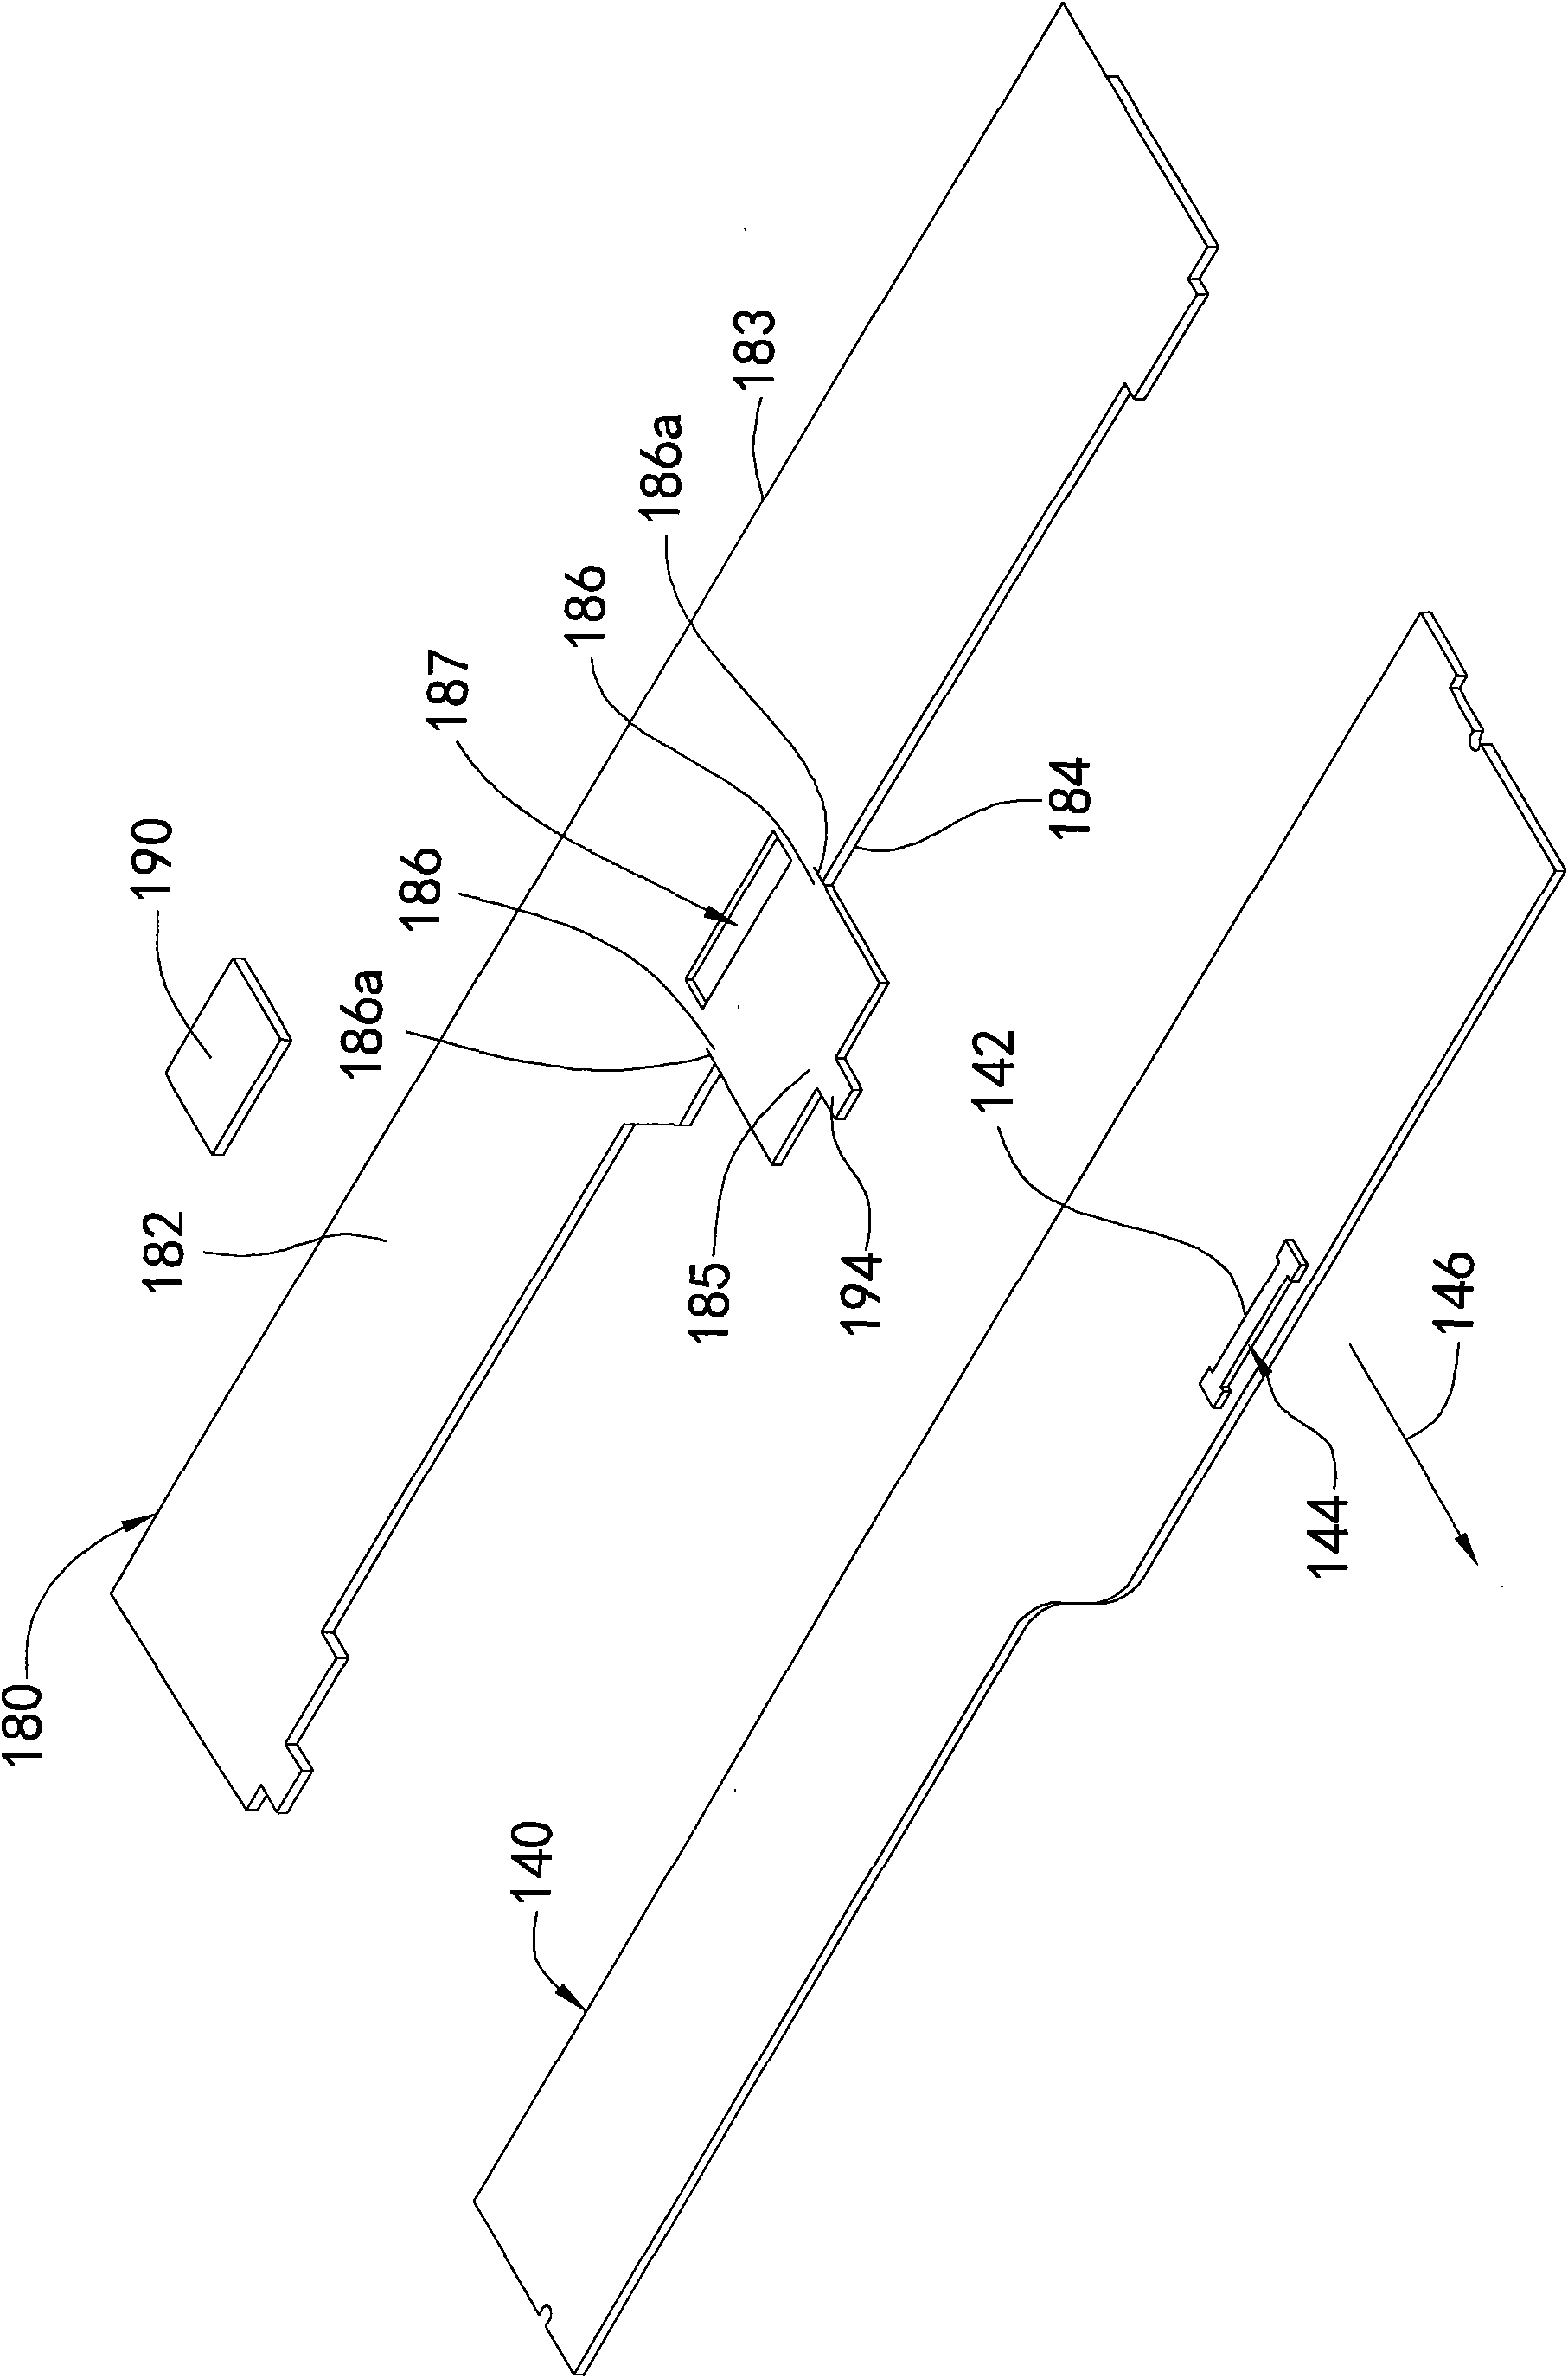 Panel display and protecting structure for same